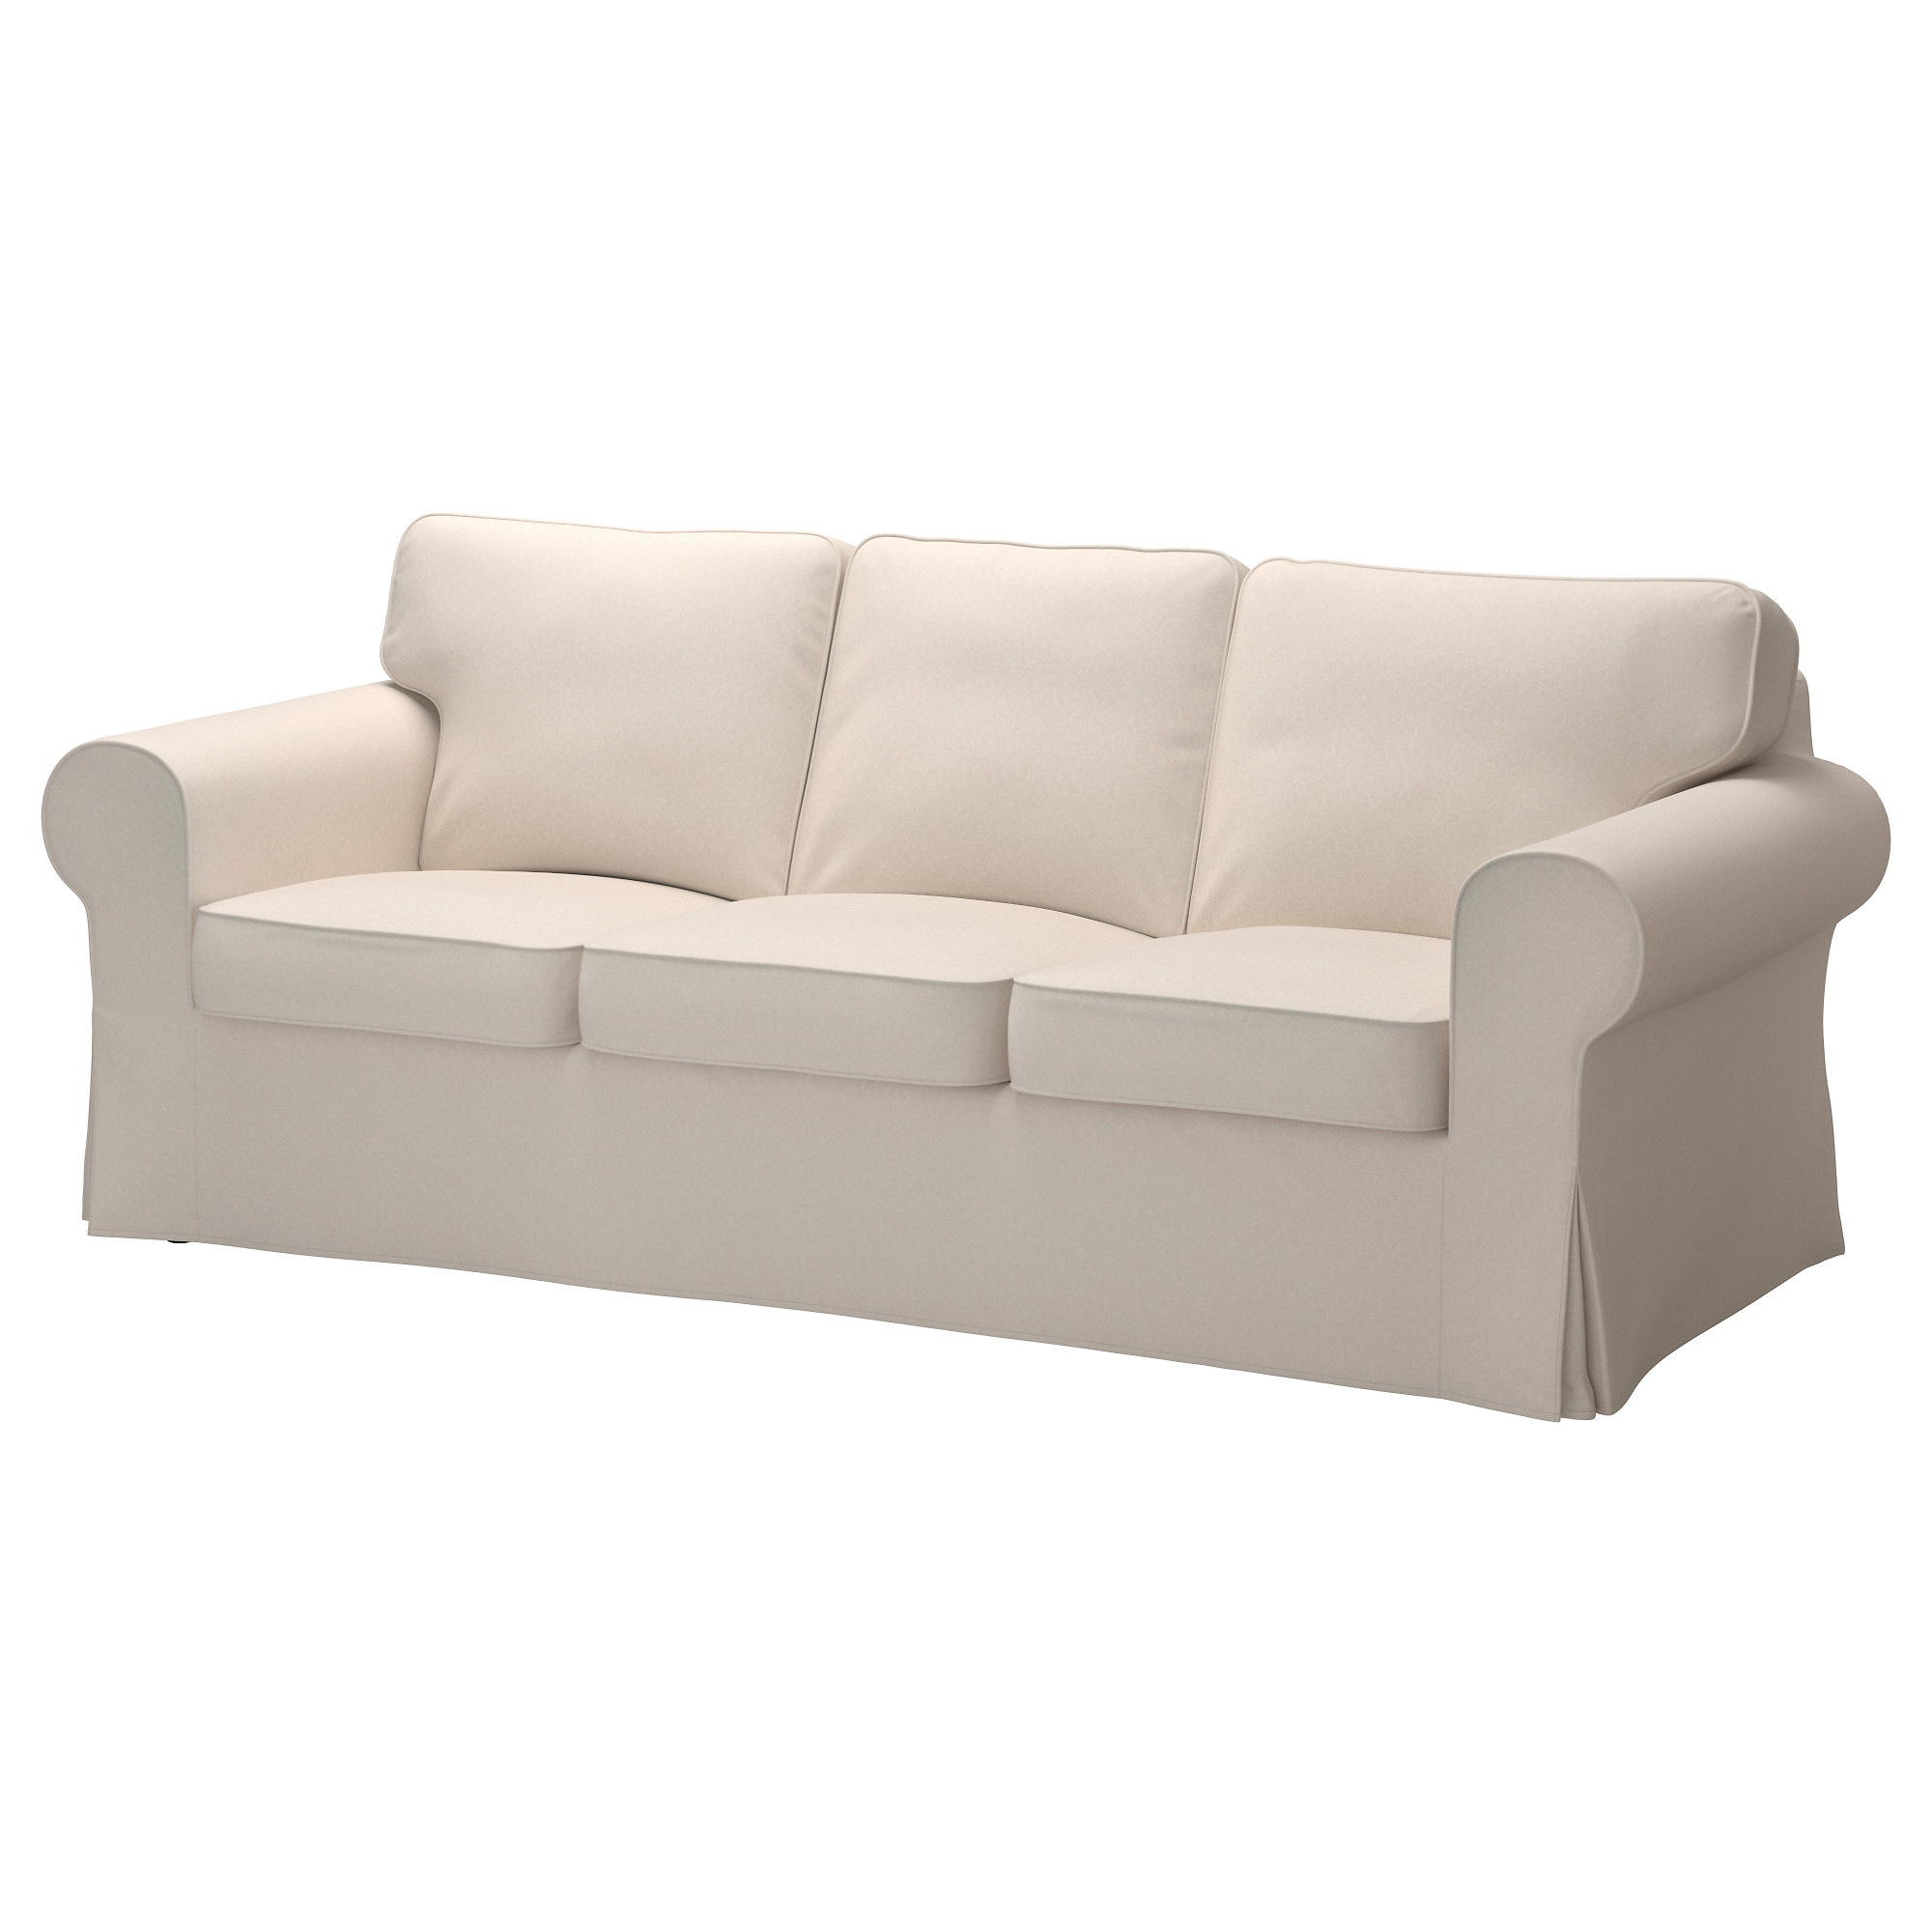 Images of Sofa | 2000x2000